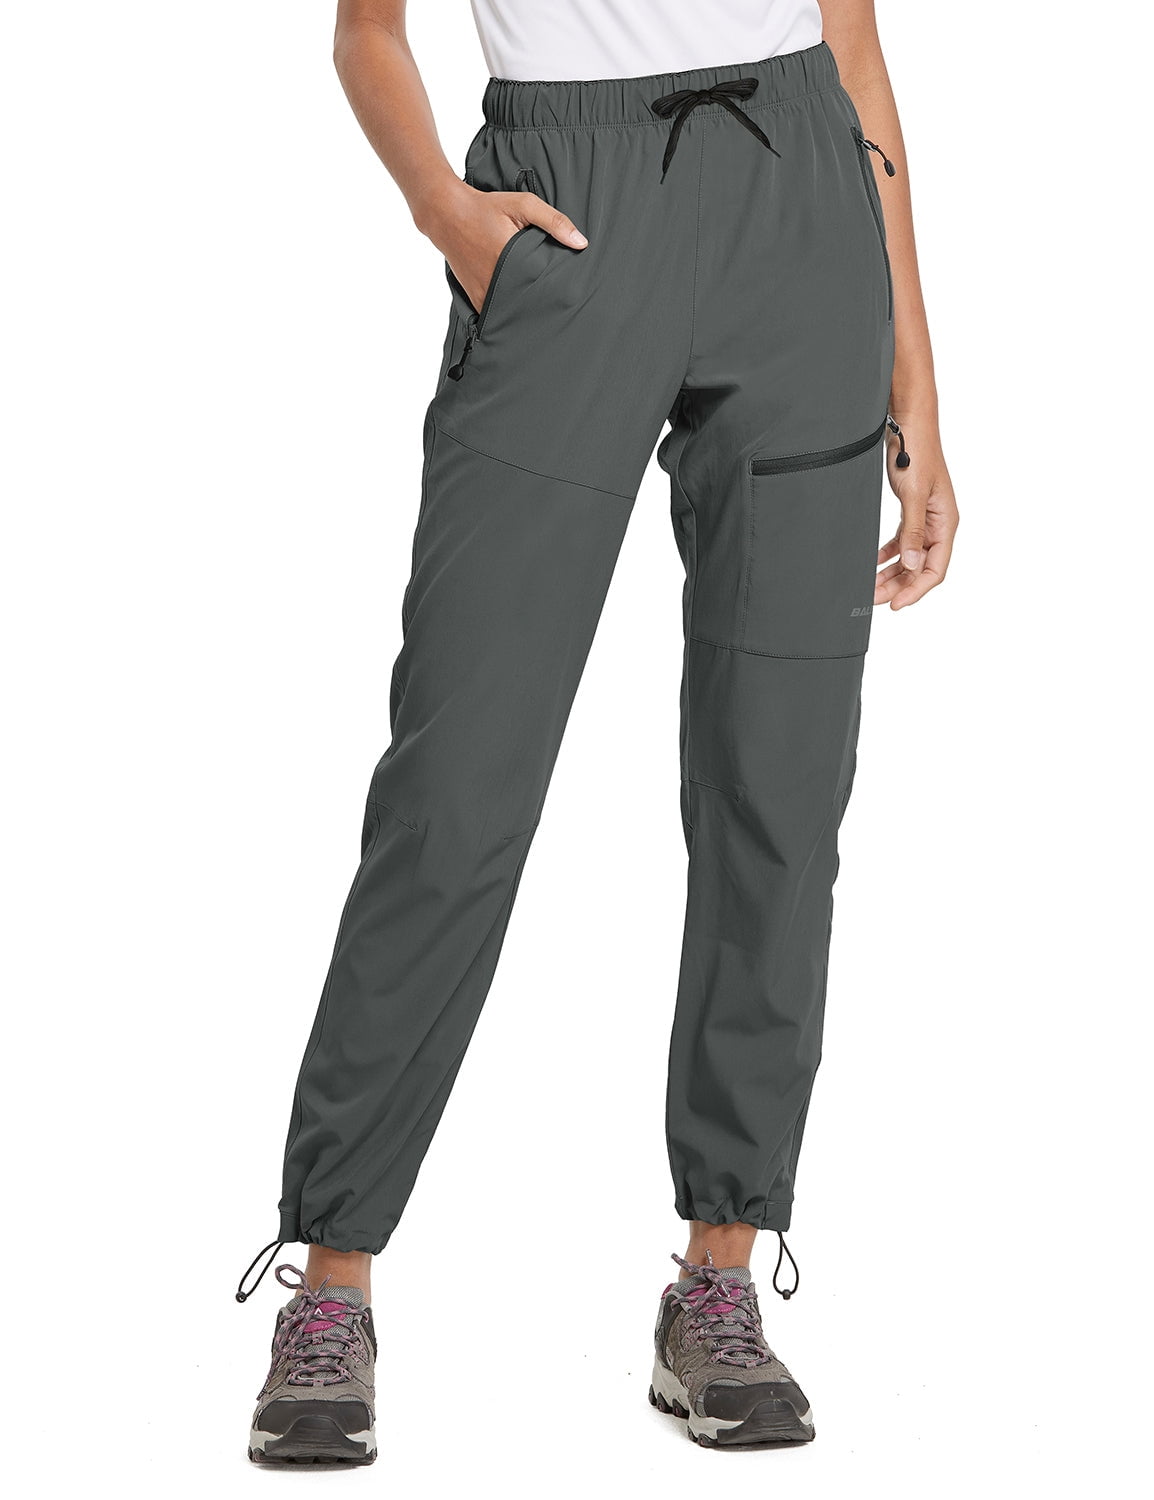 BALEAF Cargo Pants For Women Quick Dry Water Resistant With 4 Zip-Closure  Pockets Elastic Waist Deep Gray Size S 